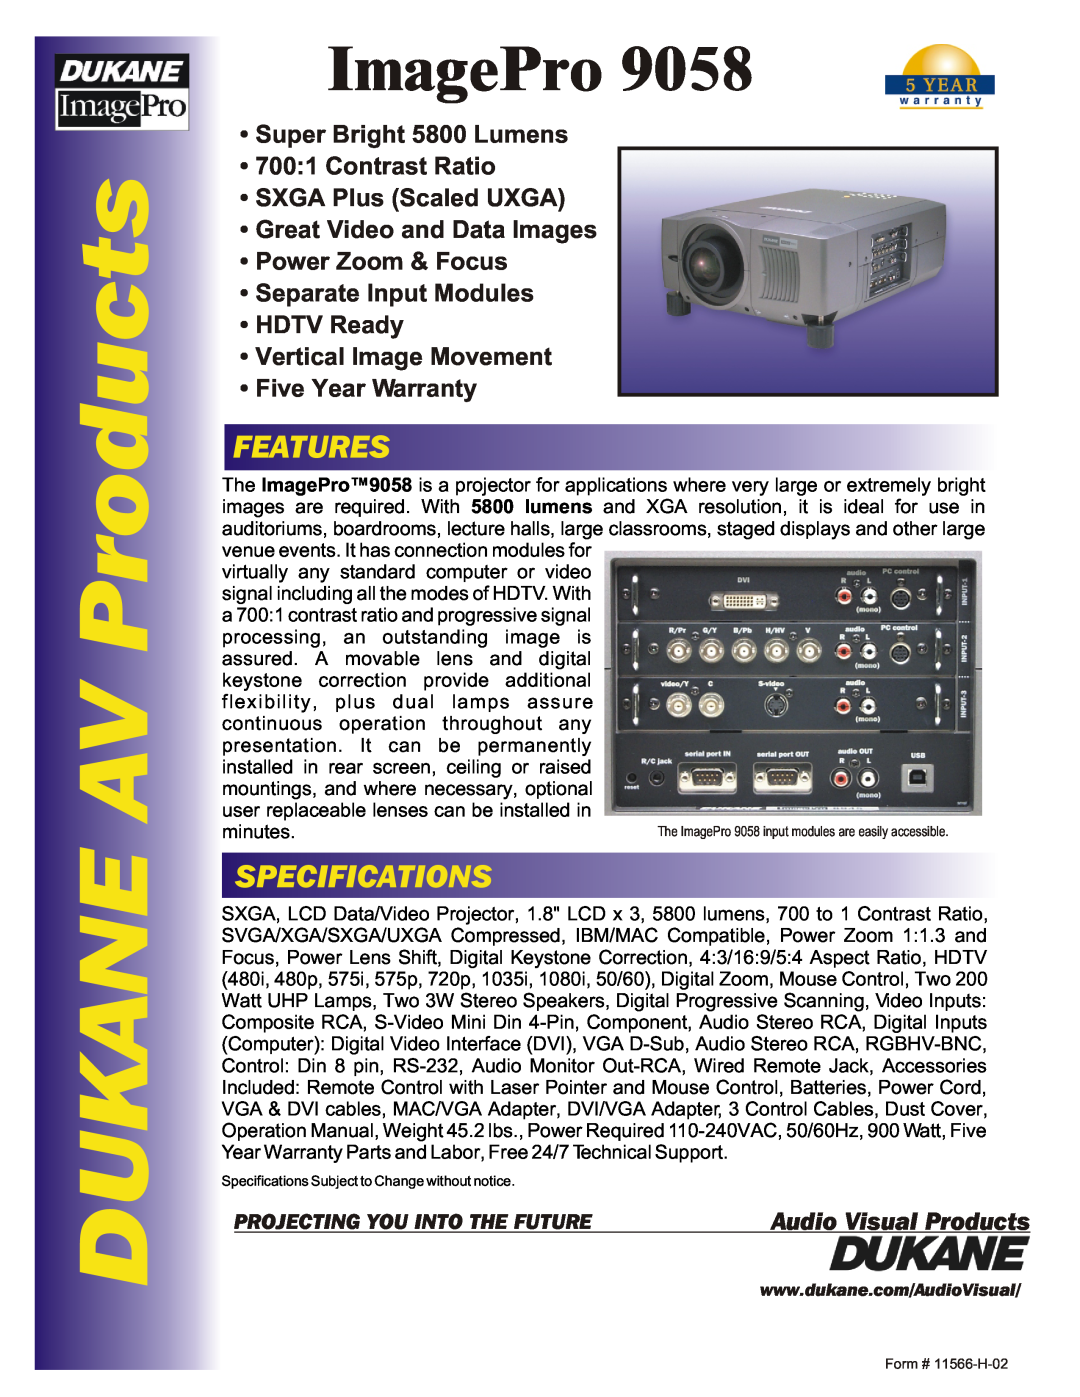 Dukane 9058 specifications DUKANE AV Products, ImagePro, Features, Specifications, Audio Visual Products 